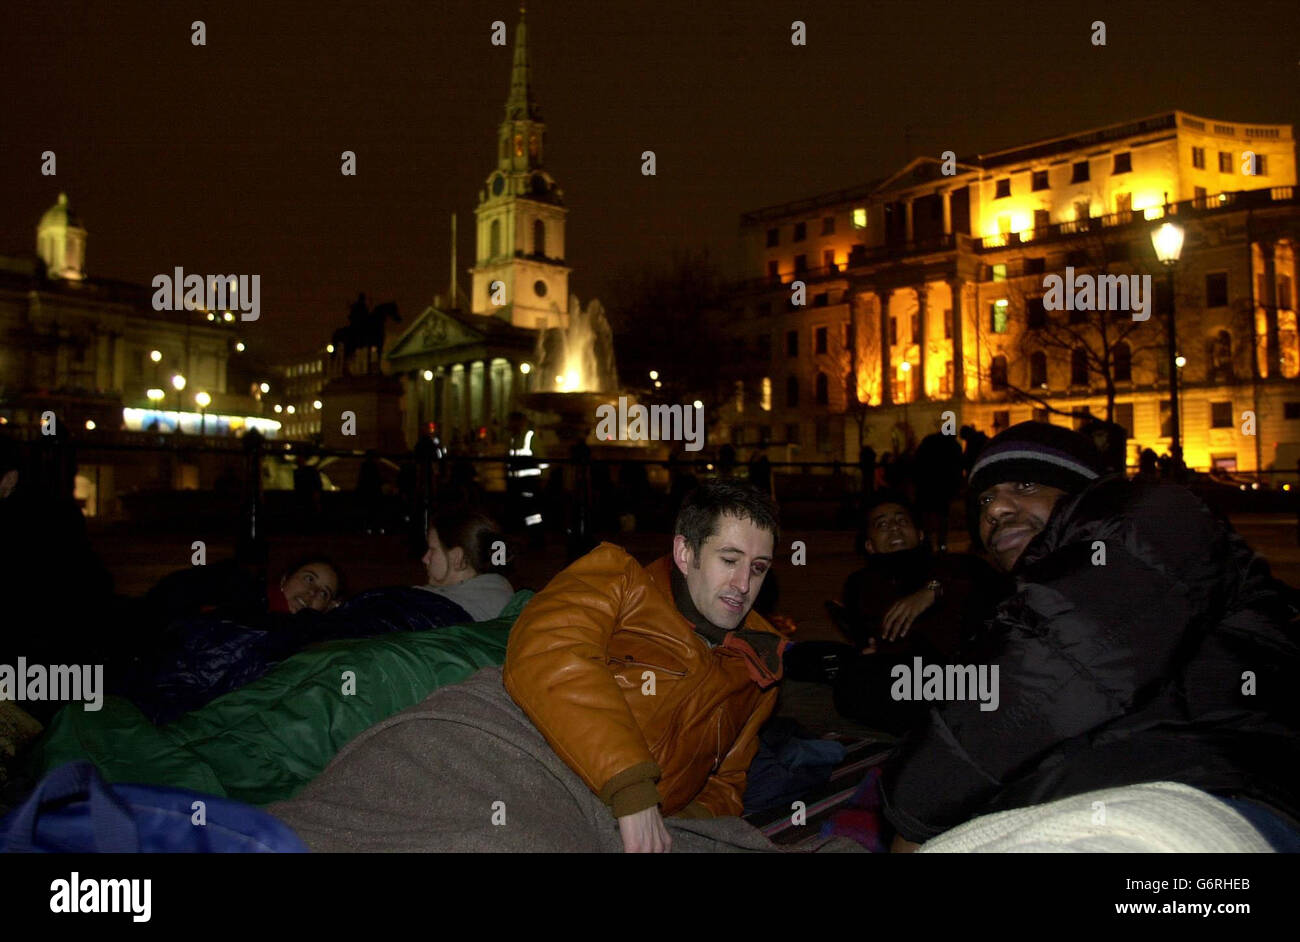 Campaigners join asylum seekers bedding down for the night in London's Trafalgar Square as part of a protest by the Campaign Against the Destitution of Asylum Seekers, demanding the repeal of Section 55 of the Immigration Act. Stock Photo